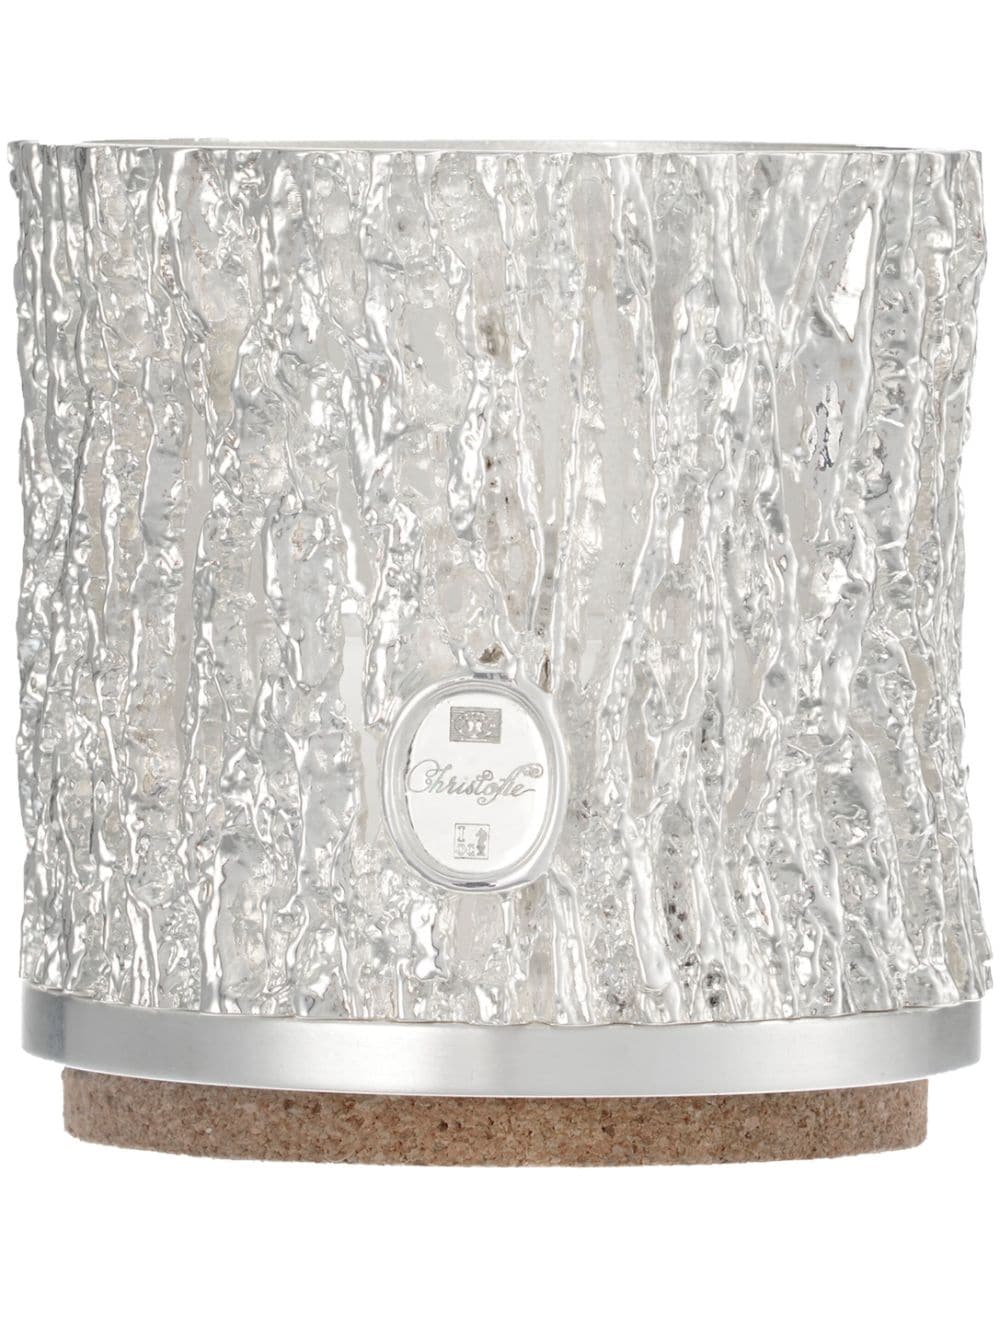 Christofle small Hurricane scented candle - Silver von Christofle